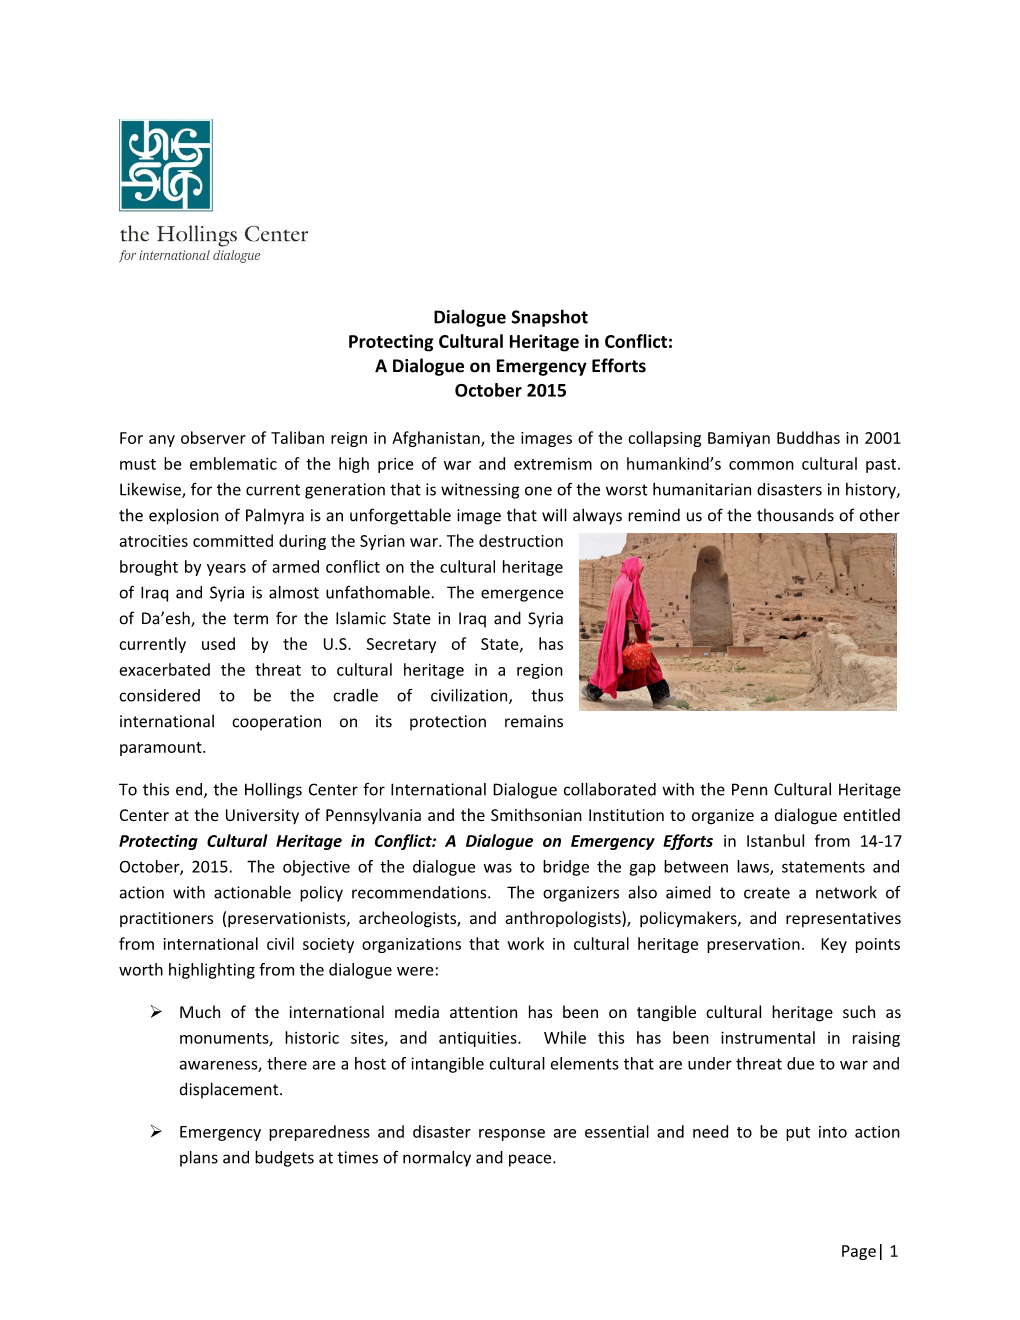 Protecting Cultural Heritage in Conflict